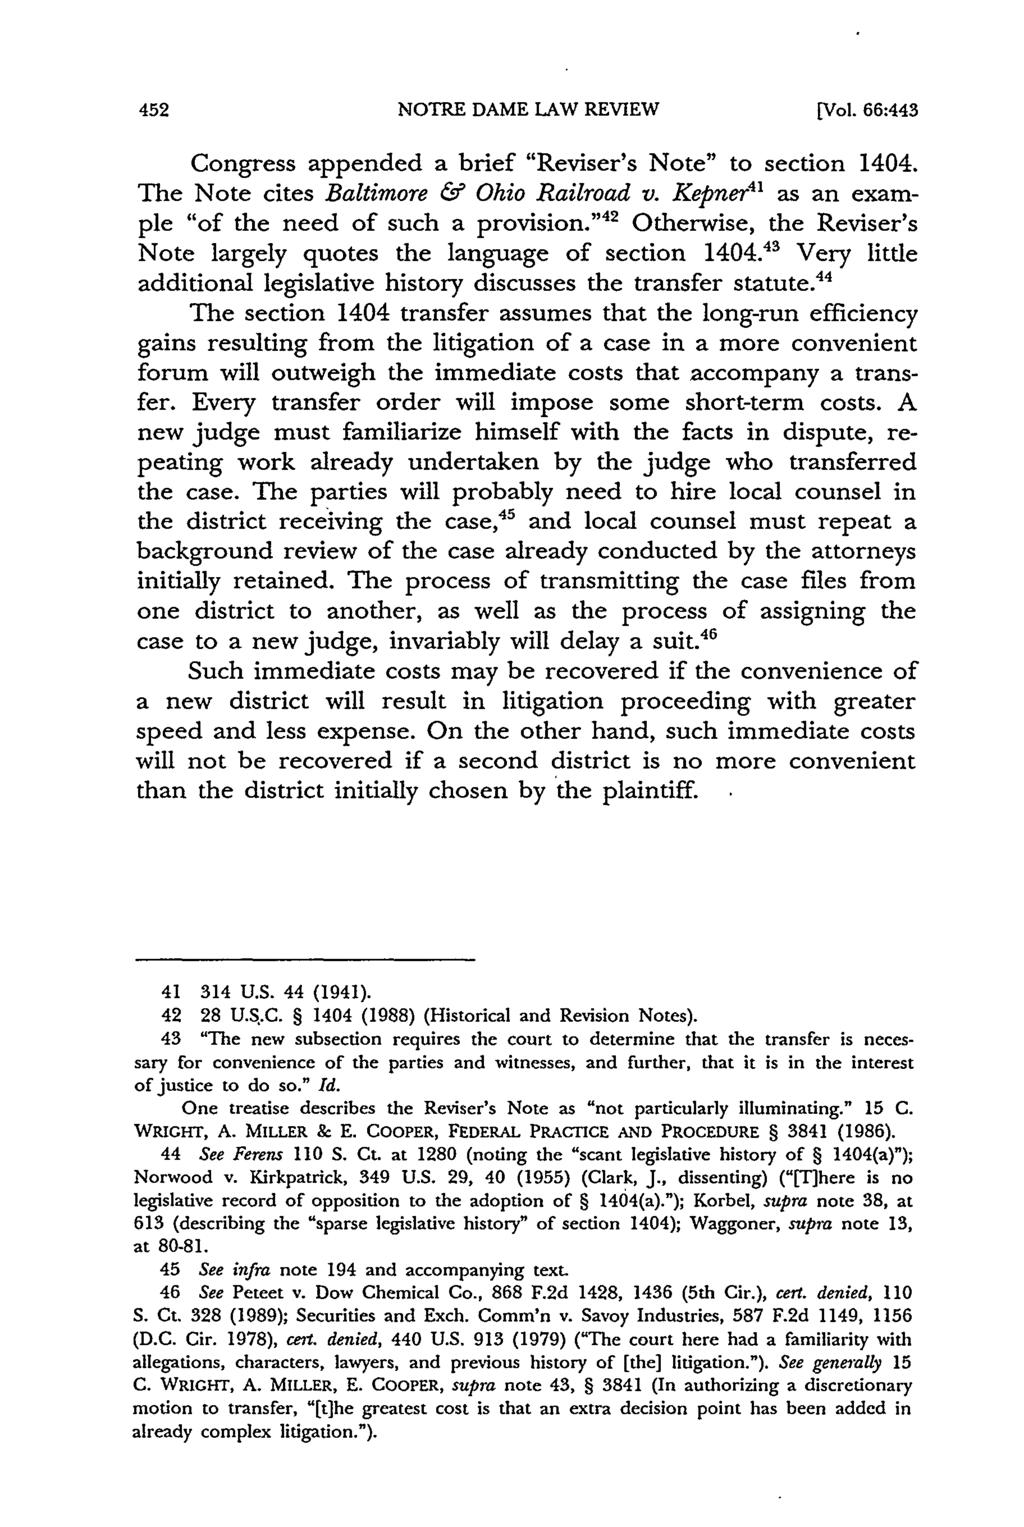 NOTRE DAME LAW REVIEW [Vol. 66:443 Congress appended a brief "Reviser's Note" to section 1404. The Note cites Baltimore & Ohio Railroad v. Kepner 4 1 as an example "of the need of such a provision.